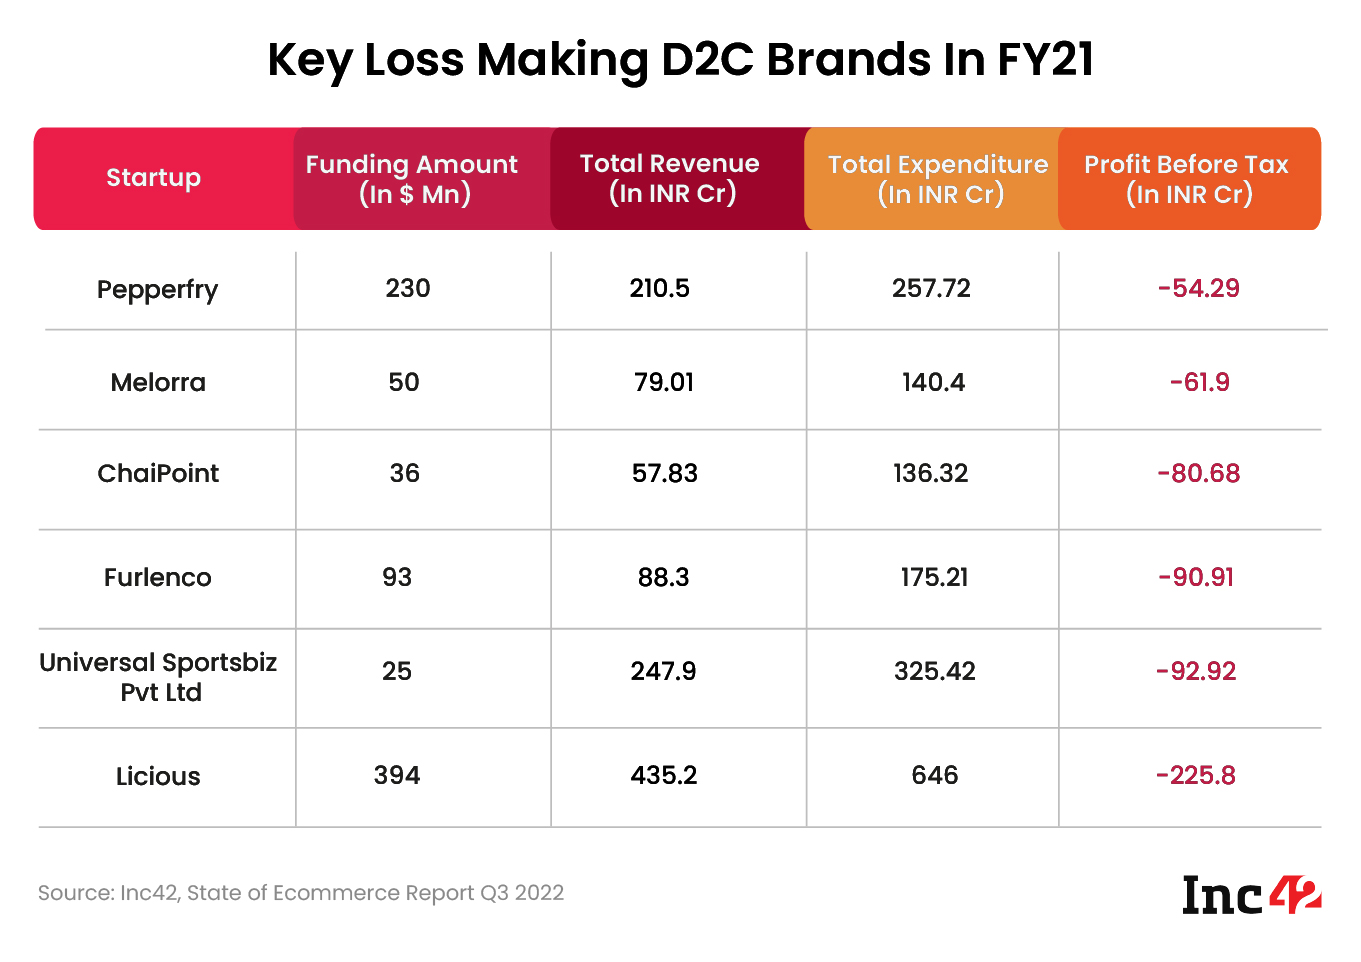 Why Indian D2C Brands Need To Go Full Throttle On Omnichannel